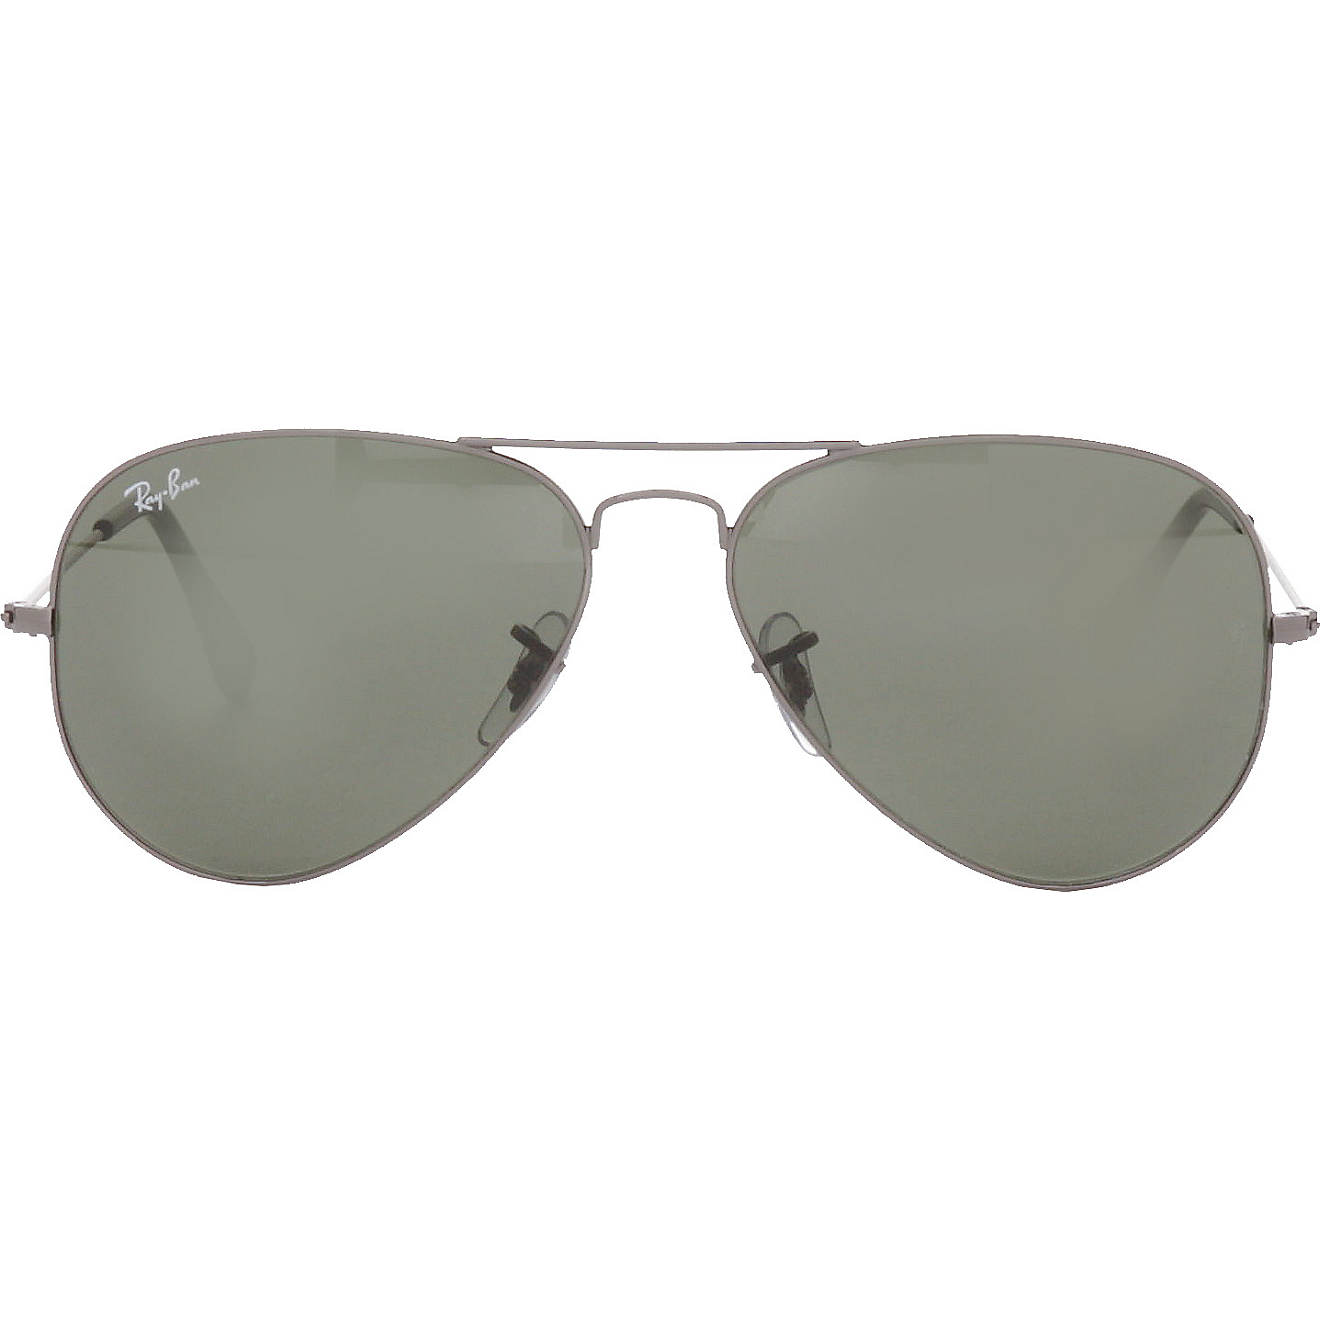 Ray-Ban Aviator Large Neutral Gray Metal Sunglasses                                                                              - view number 1